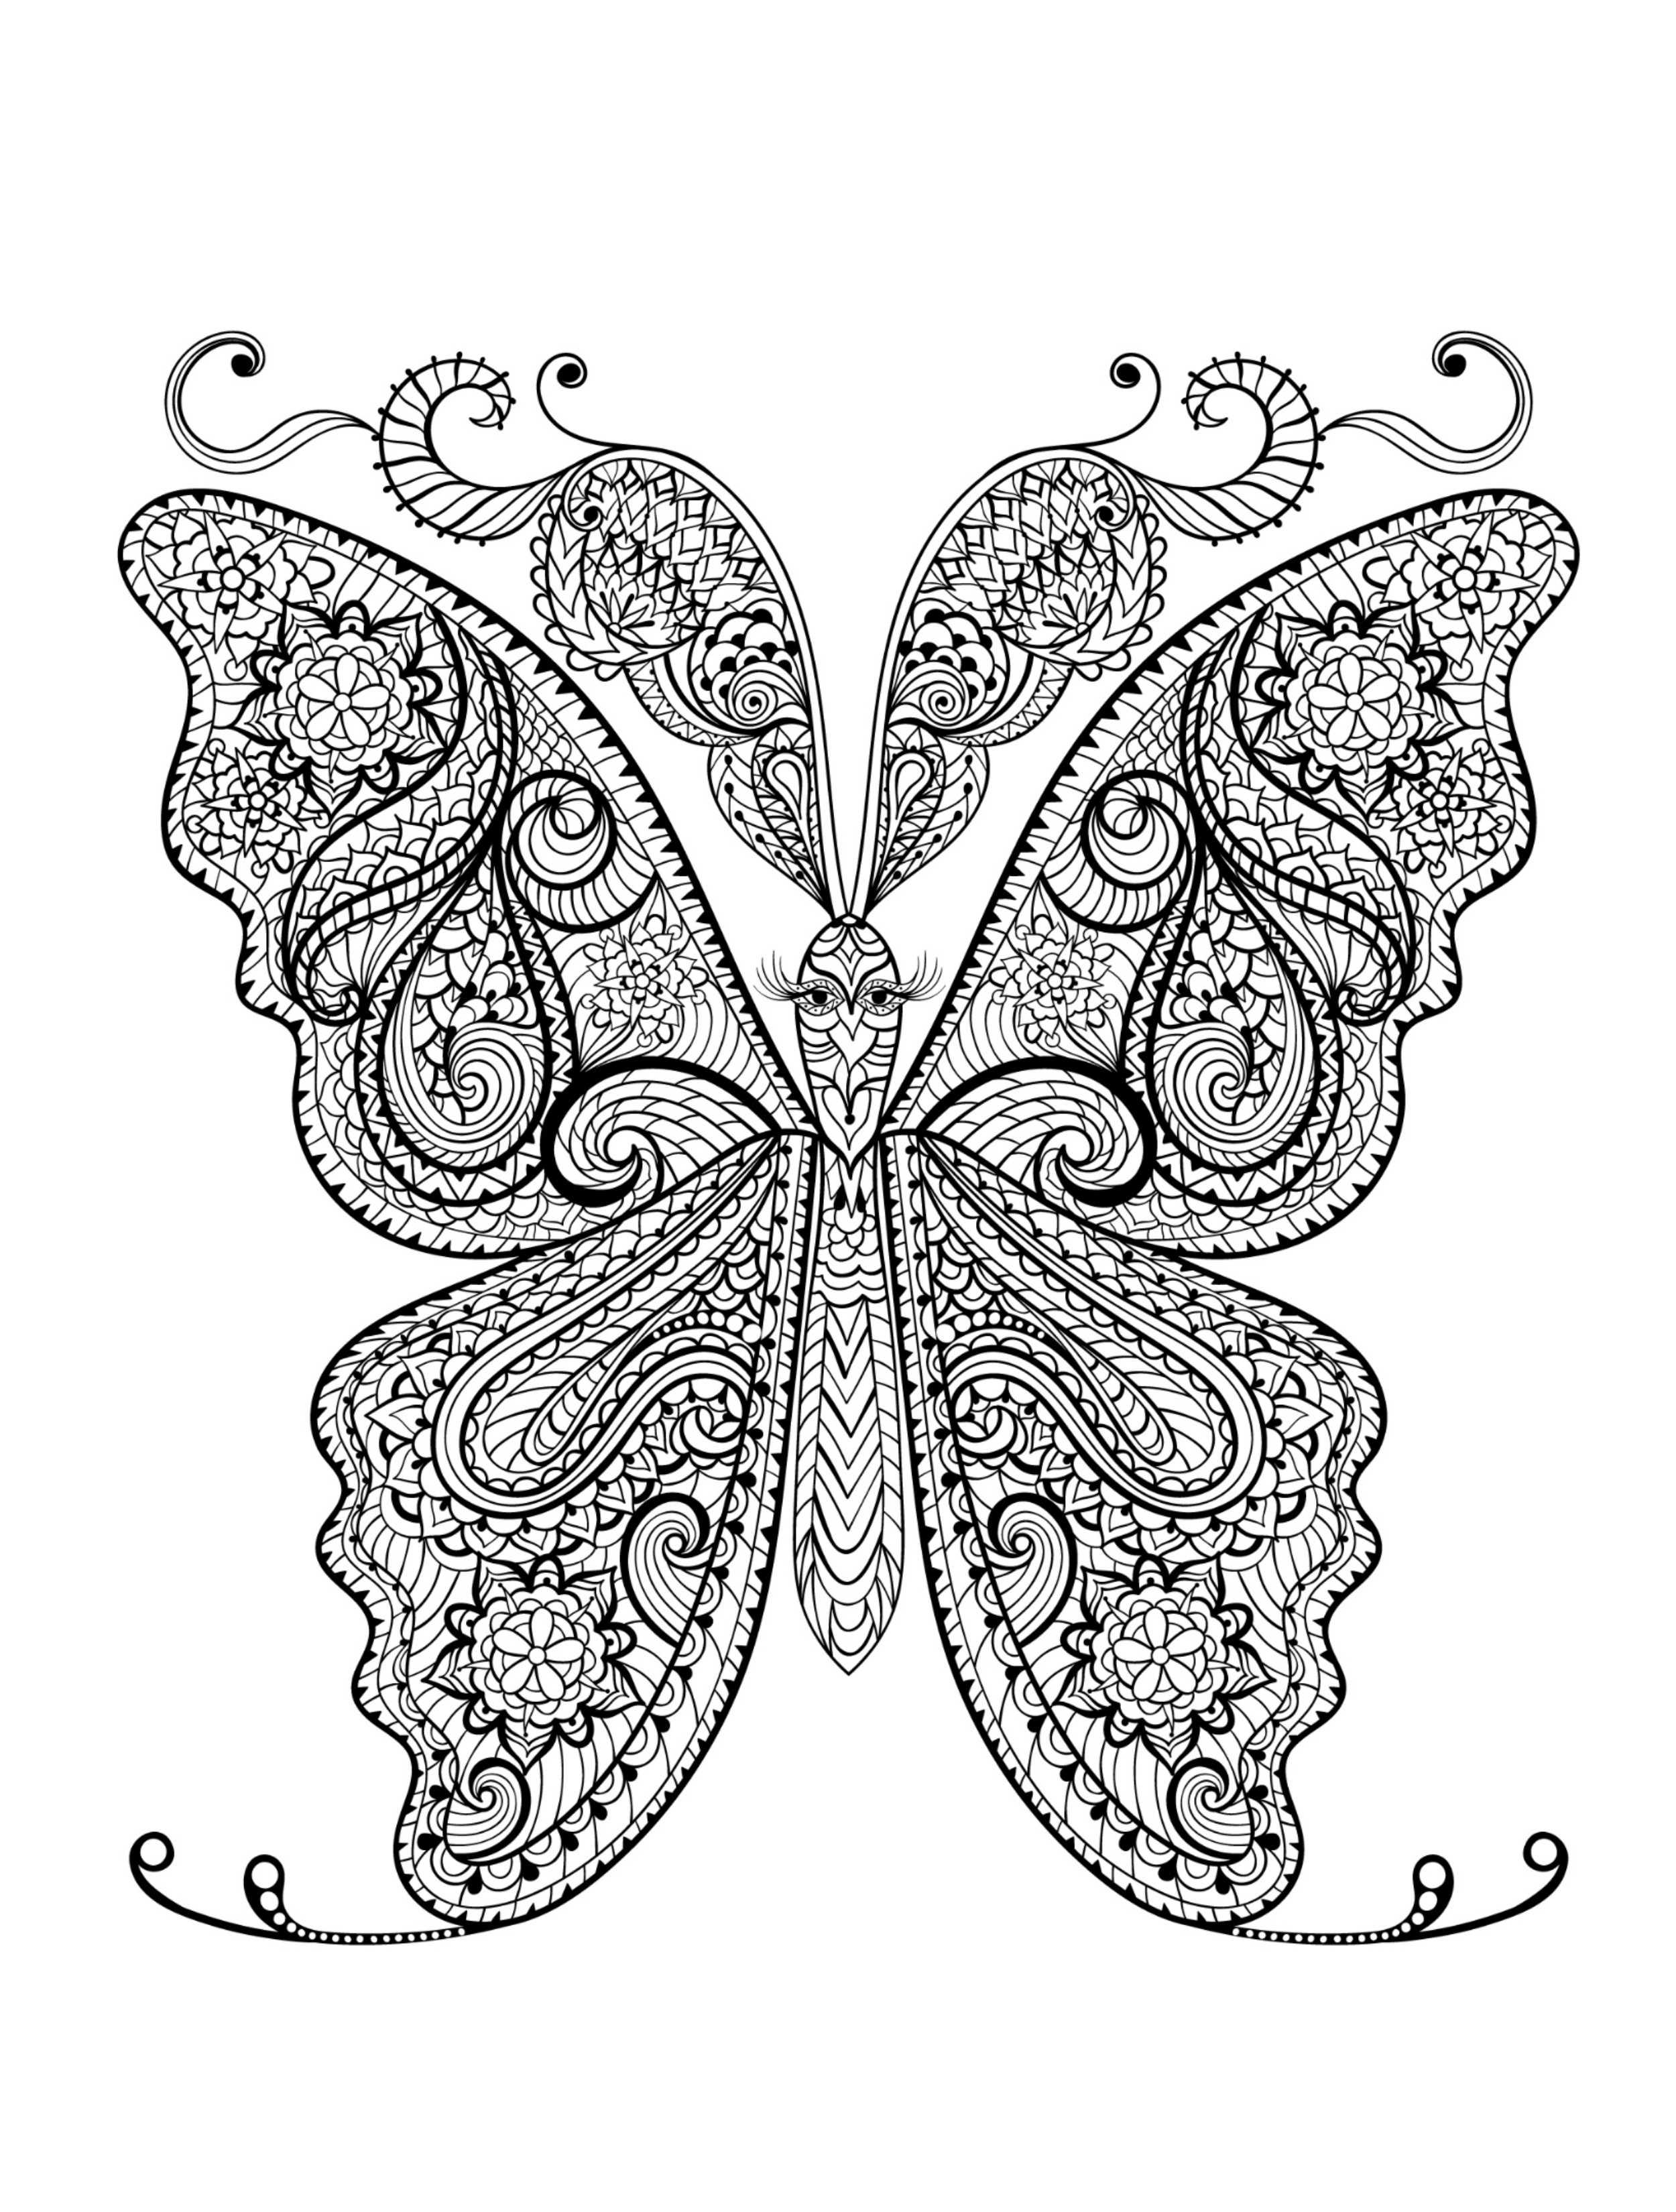 Butterfly Coloring Pages For Adults
 Animal Coloring Pages for Adults Best Coloring Pages For